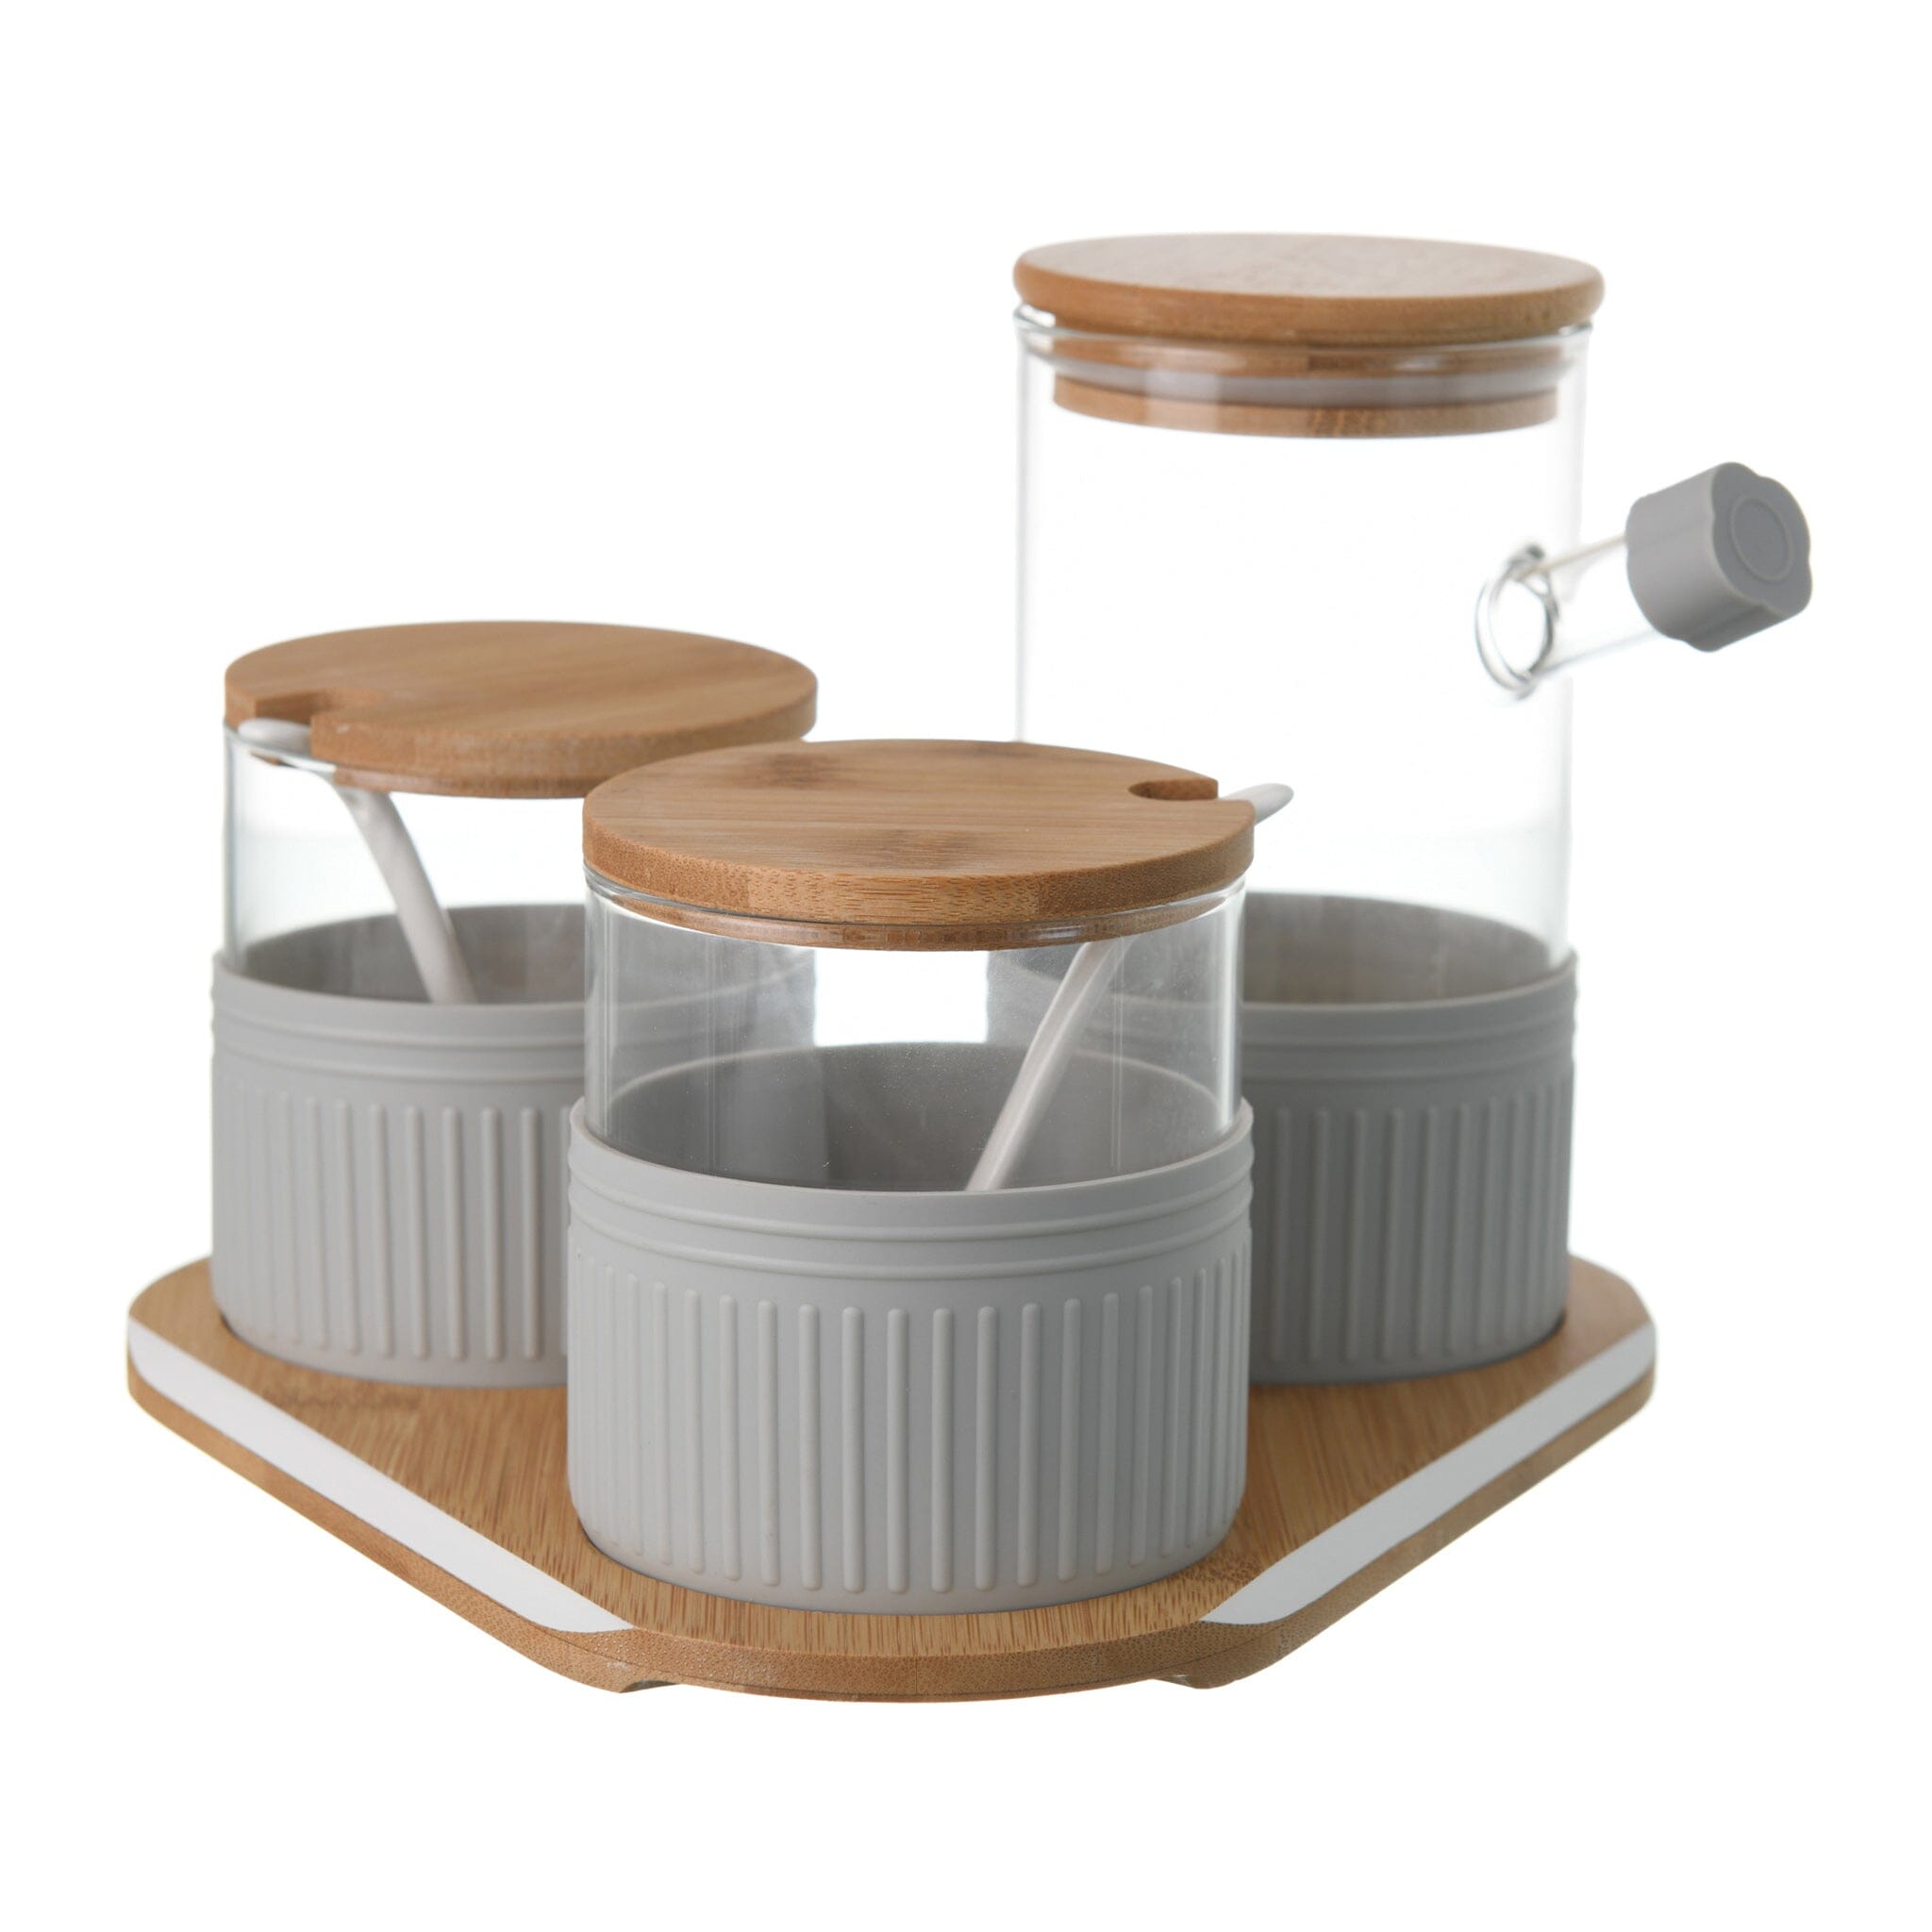 O'lala - Set of Wooden and Glass Spice Jars With Tray - Grey - 770008001